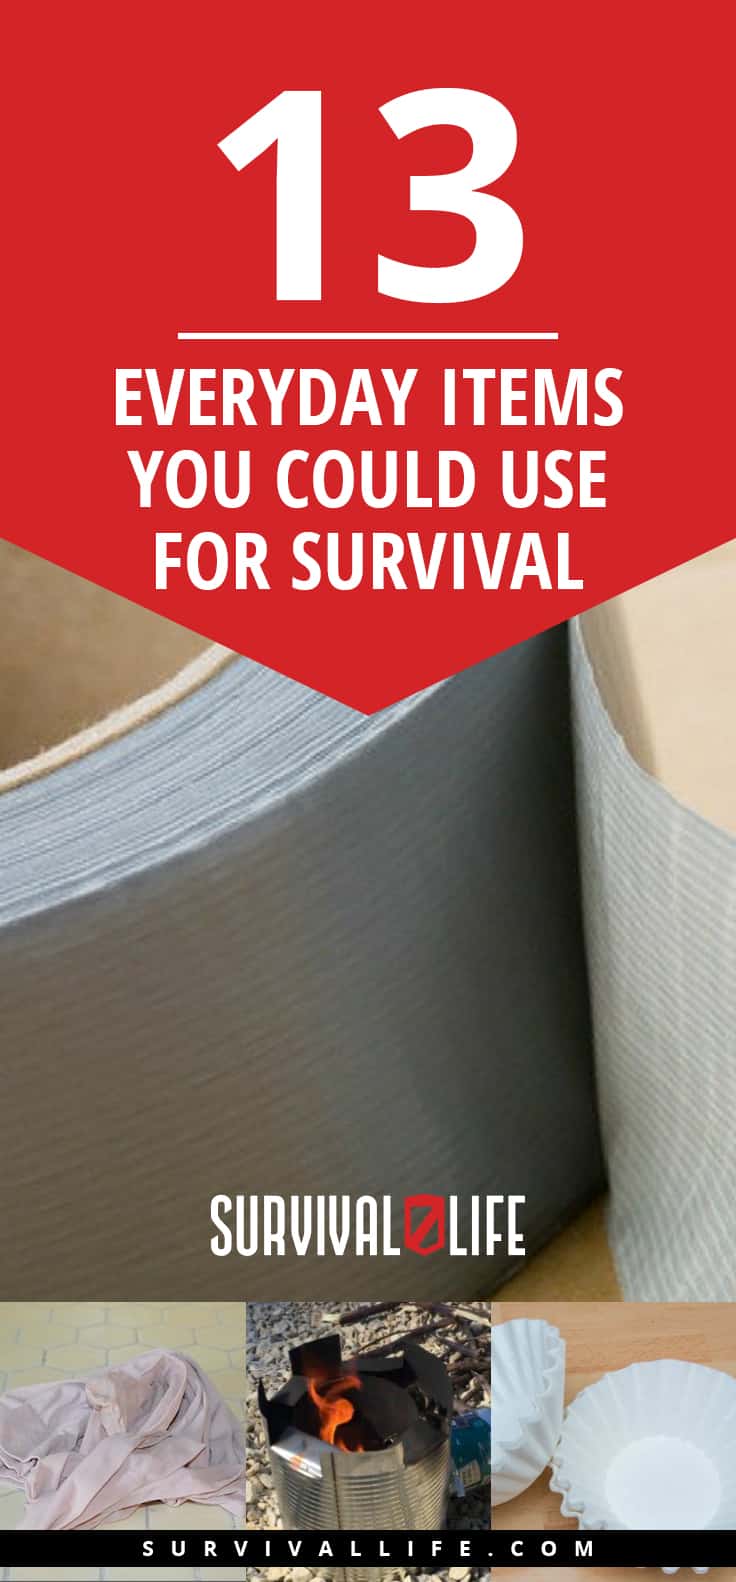 13 Everyday Items You Could Use For Survival | https://survivallife.com/everyday-items-for-survival/